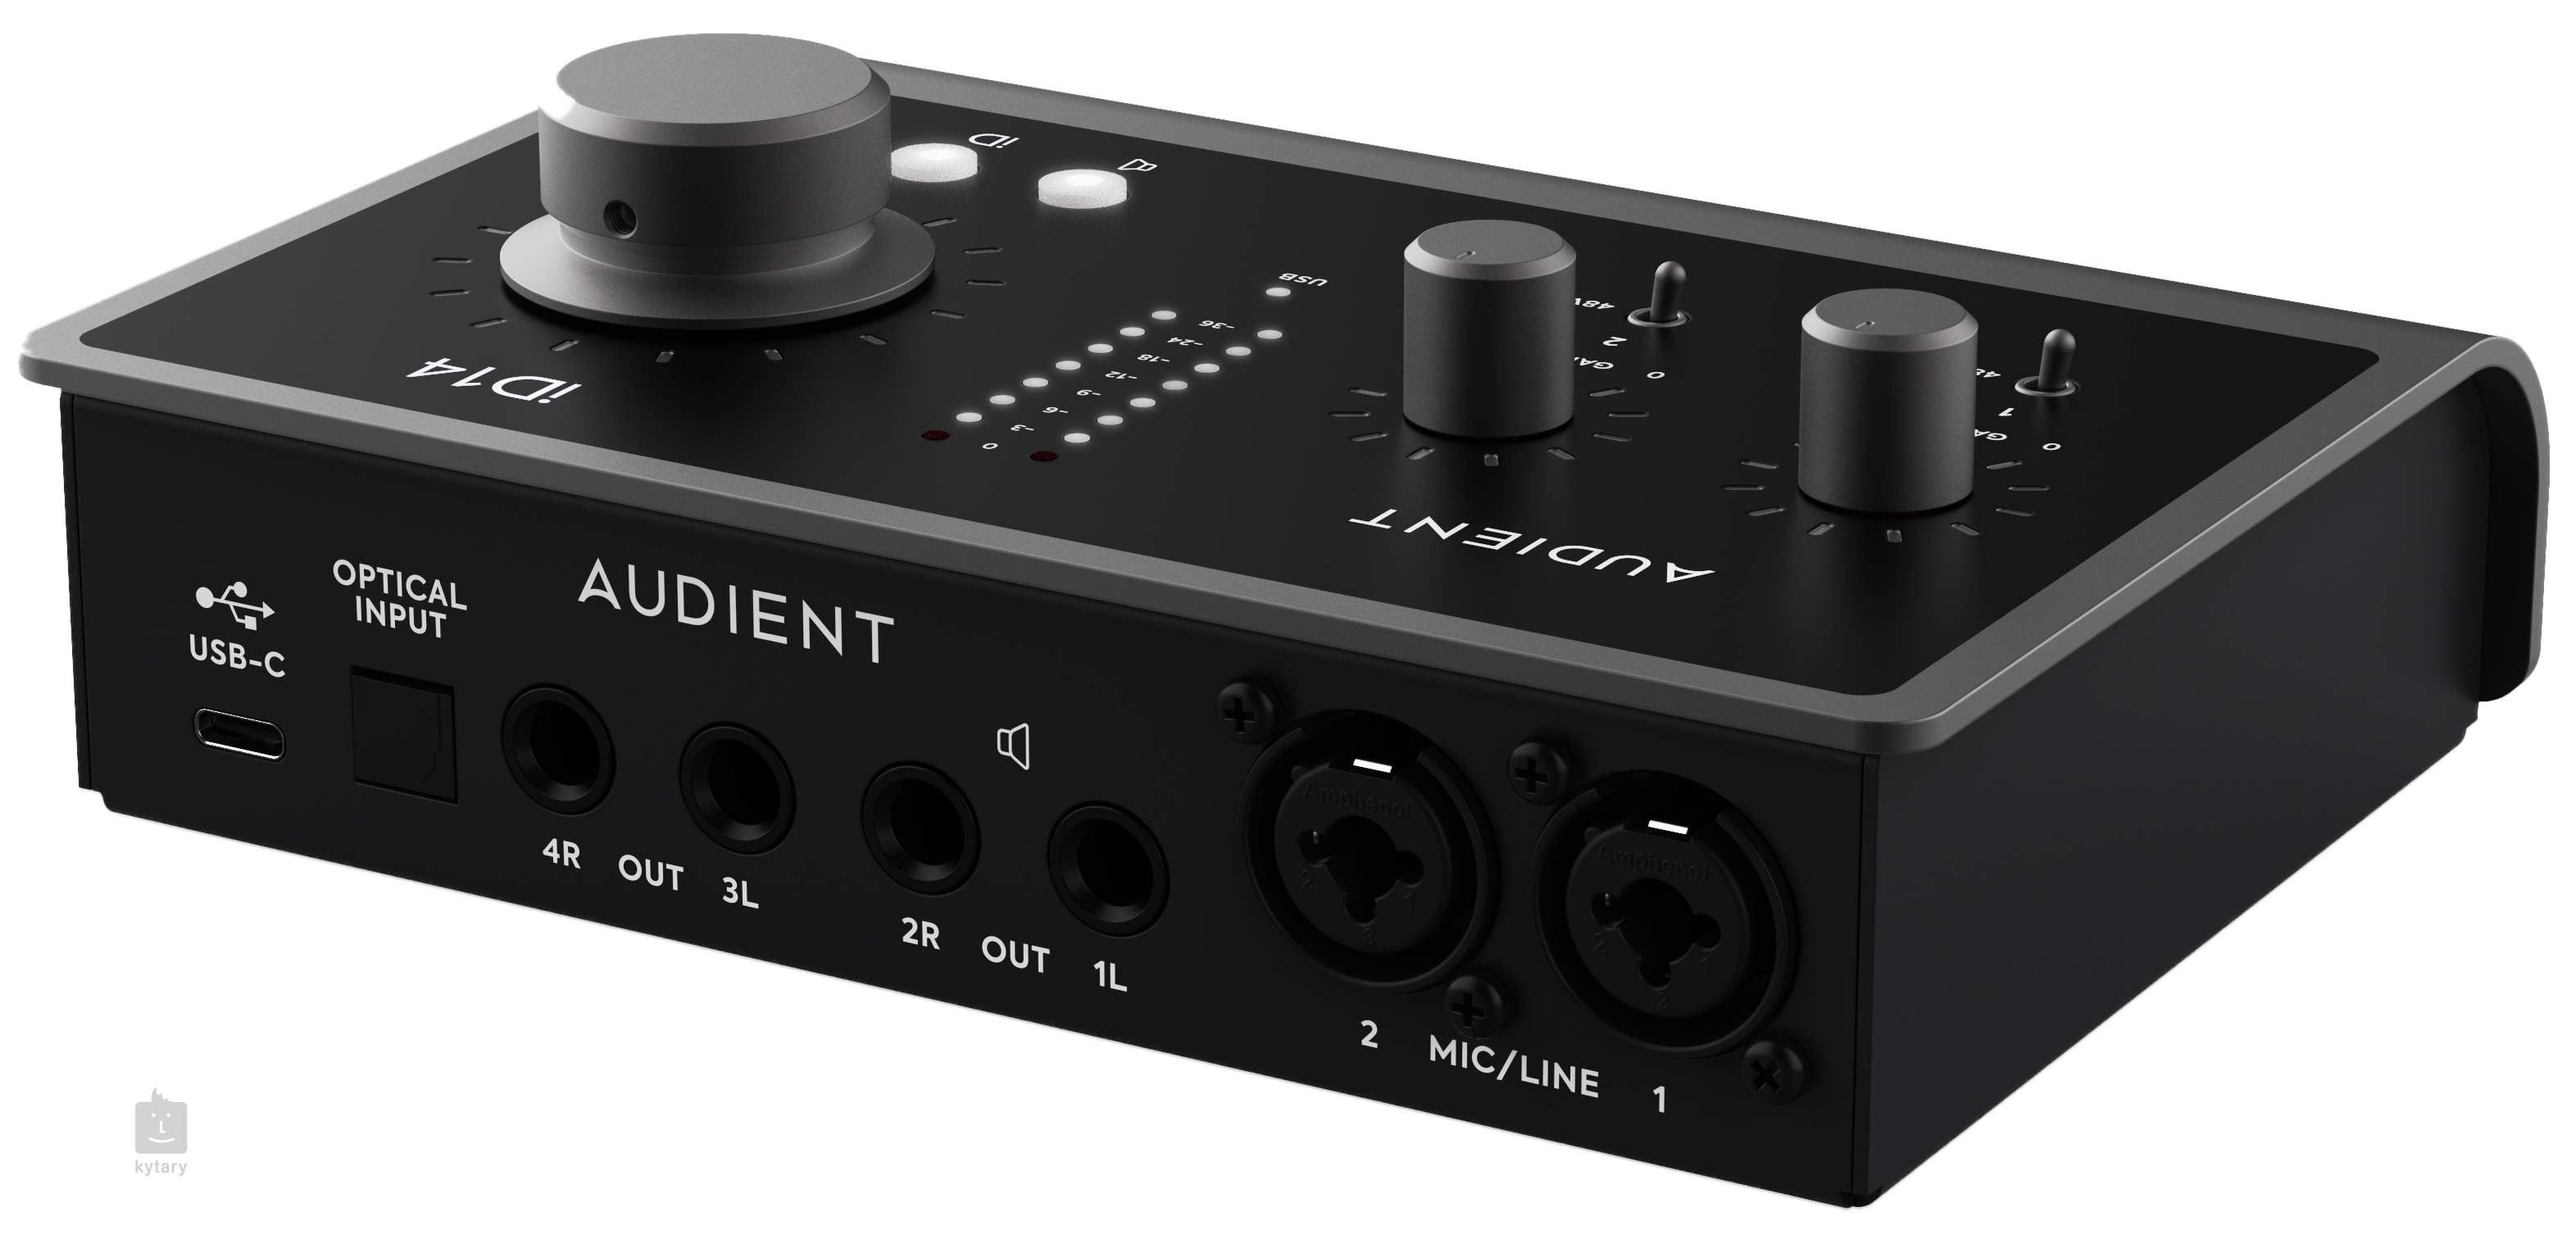 Audient id 4. Audient id14 MK II. Audient id14 mk2. Звуковая карта Audient id14 MKII. Audient id14 MKII Audient.